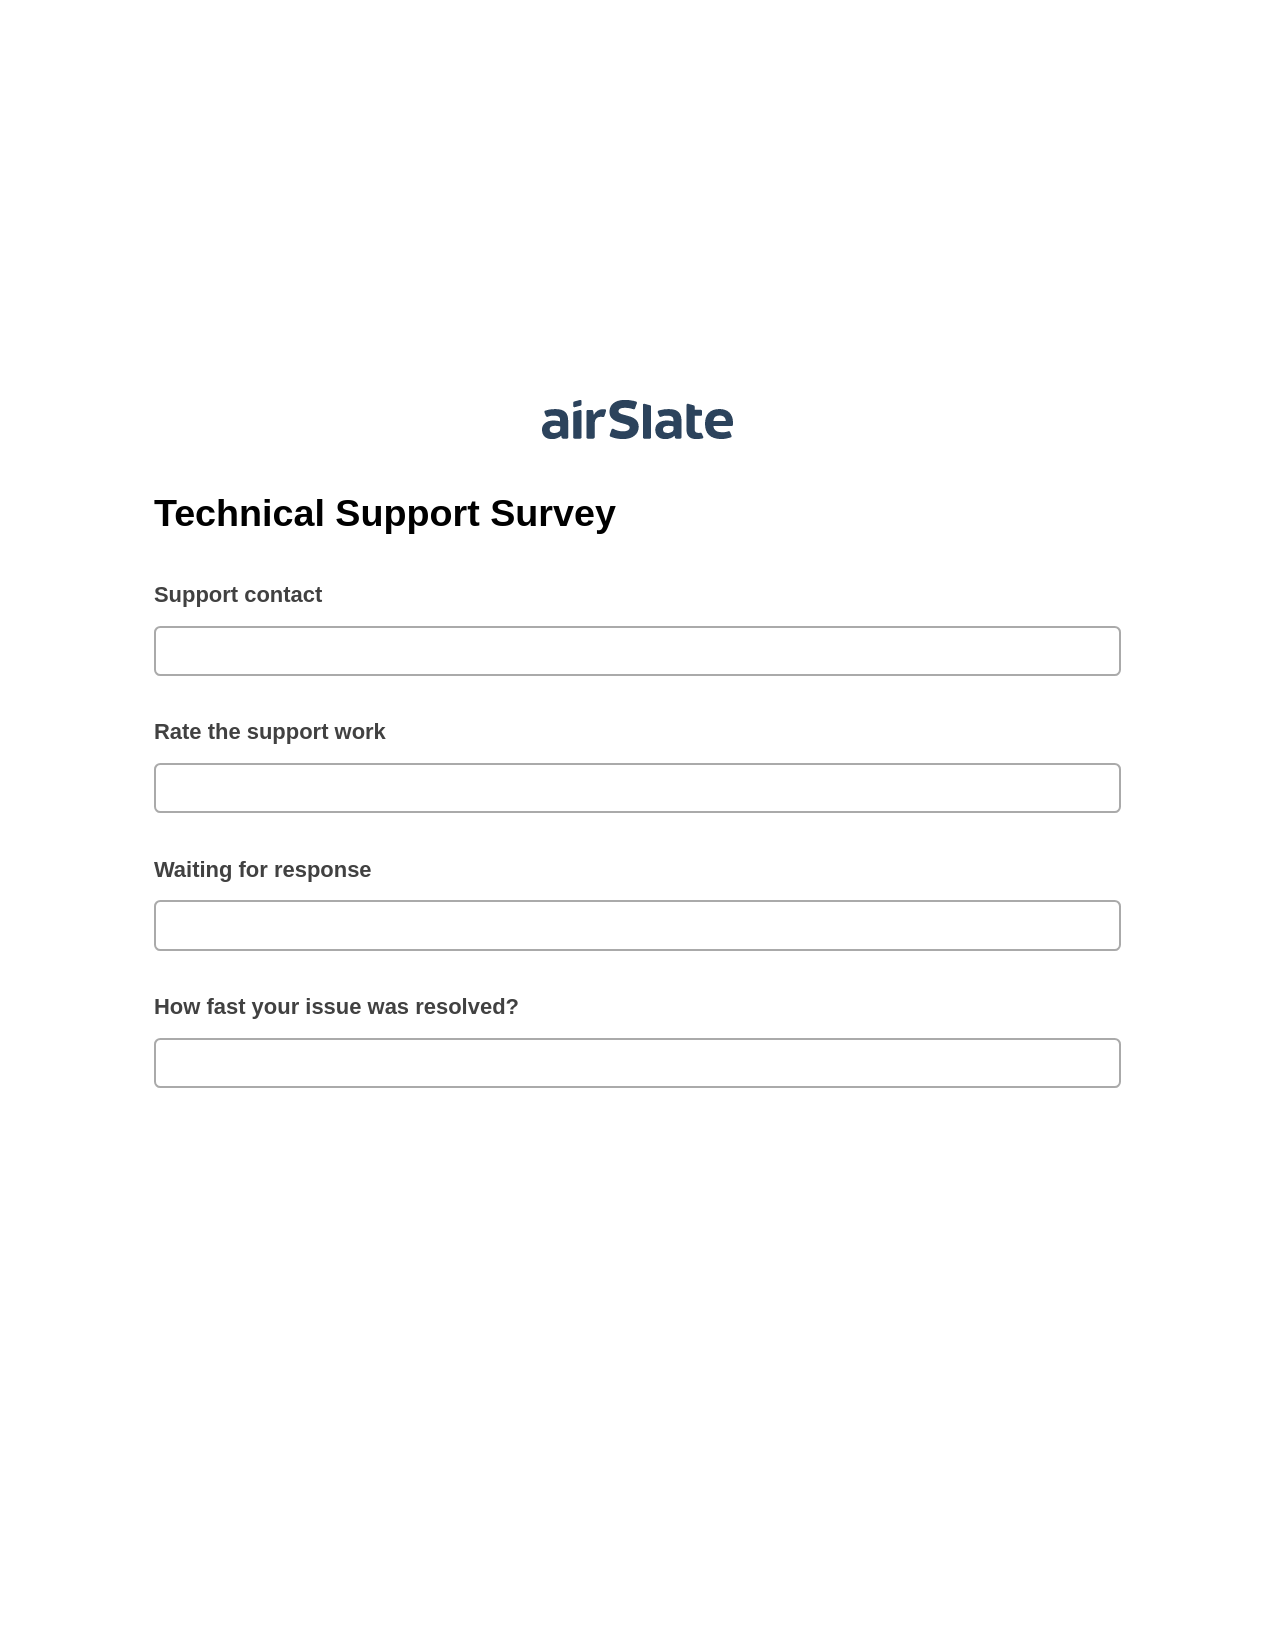 Technical Support Survey Pre-fill from Salesforce Records with SOQL Bot, Custom Field's Value Bot, Archive to SharePoint Folder Bot